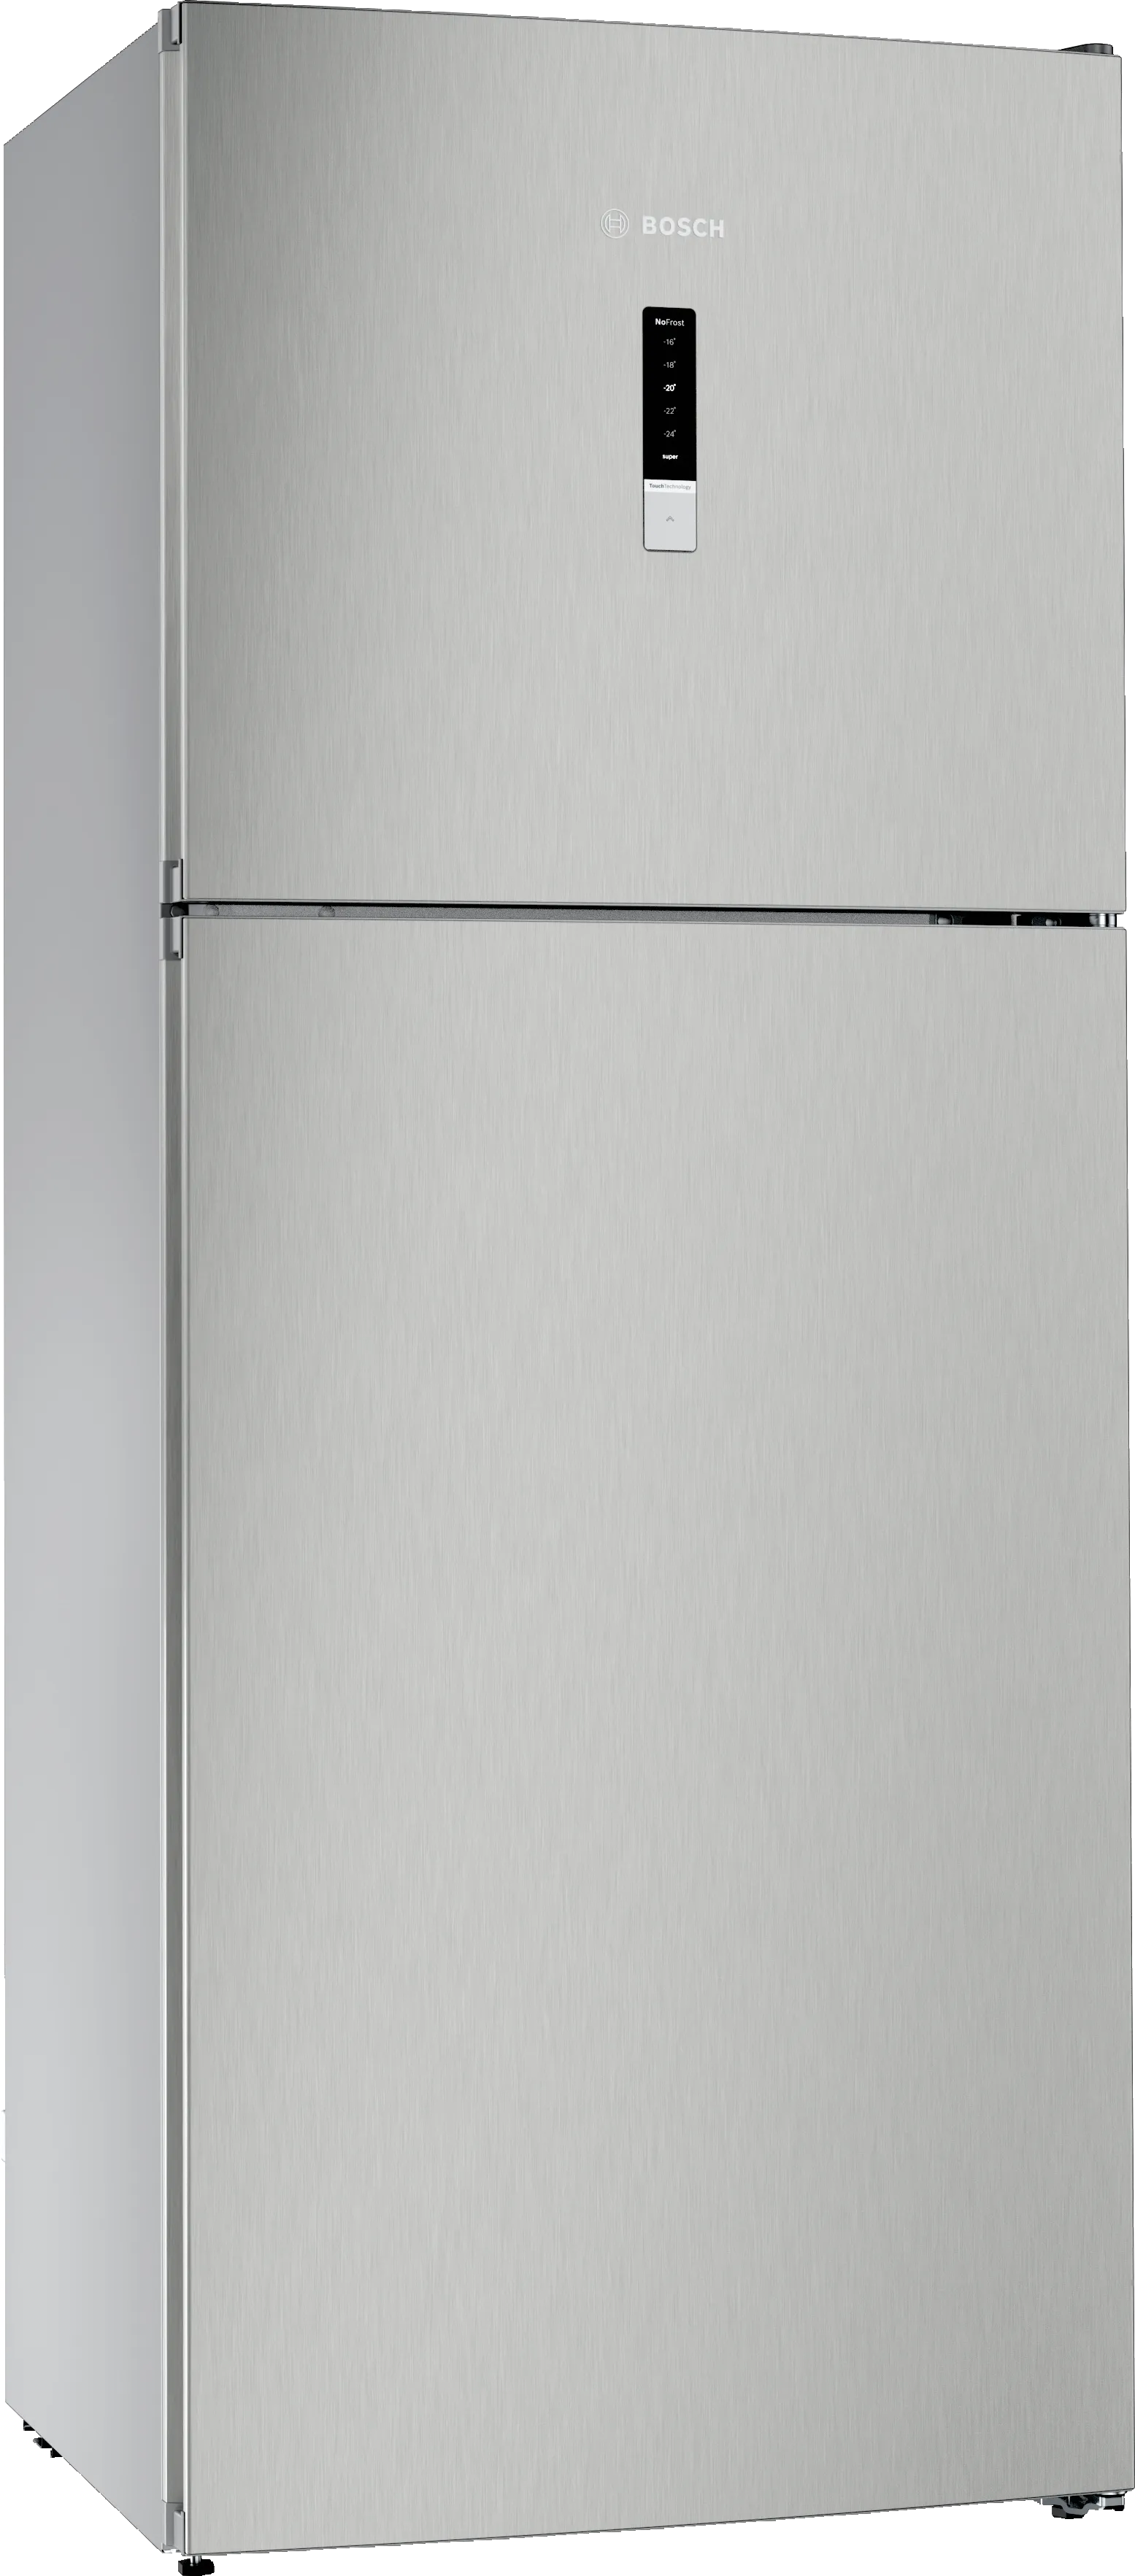 Series 4 free-standing fridge-freezer with freezer at top 178 x 70 cm Stainless steel look 